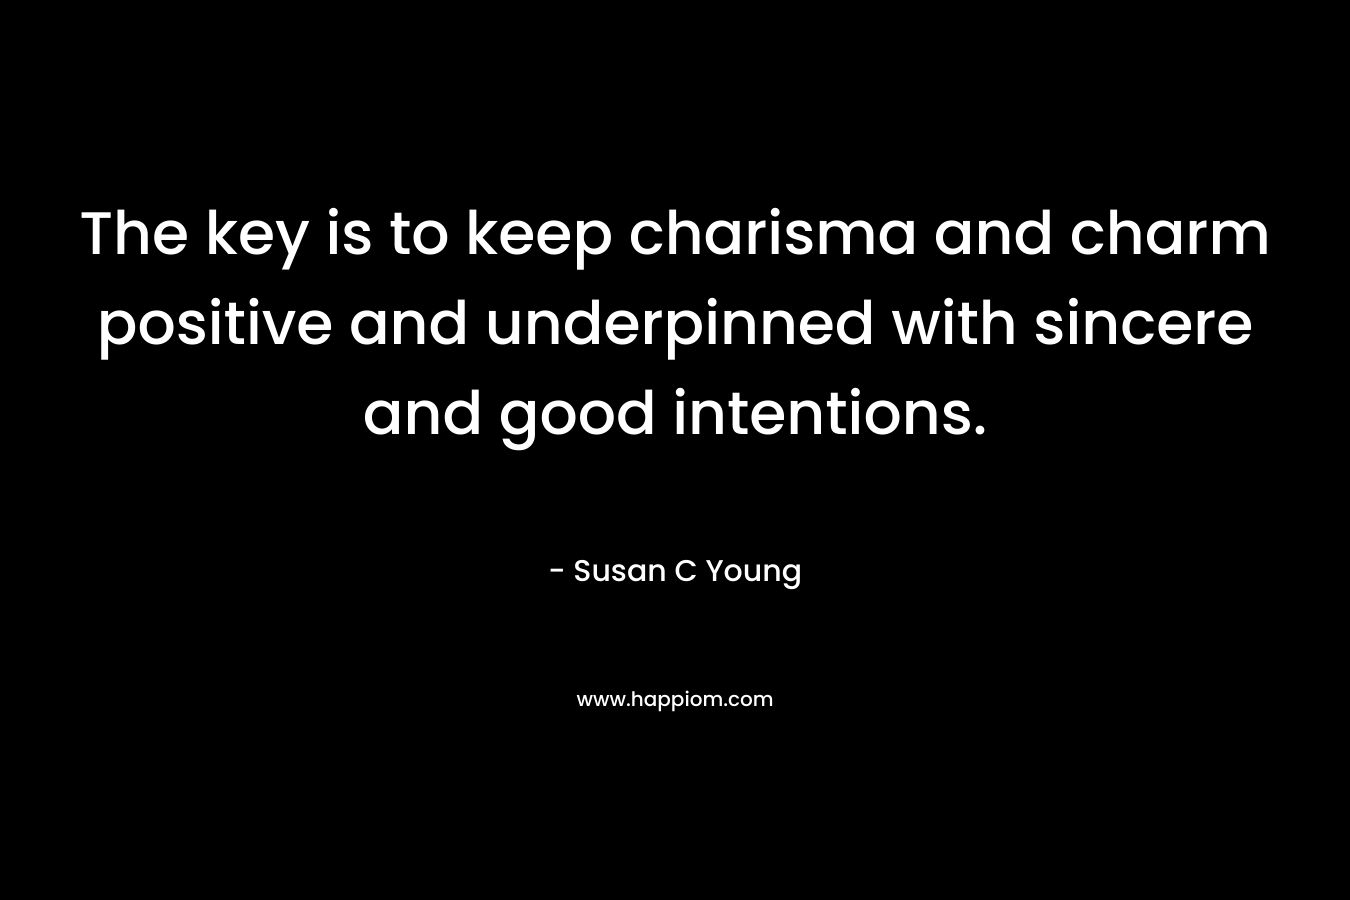 The key is to keep charisma and charm positive and underpinned with sincere and good intentions. – Susan C Young